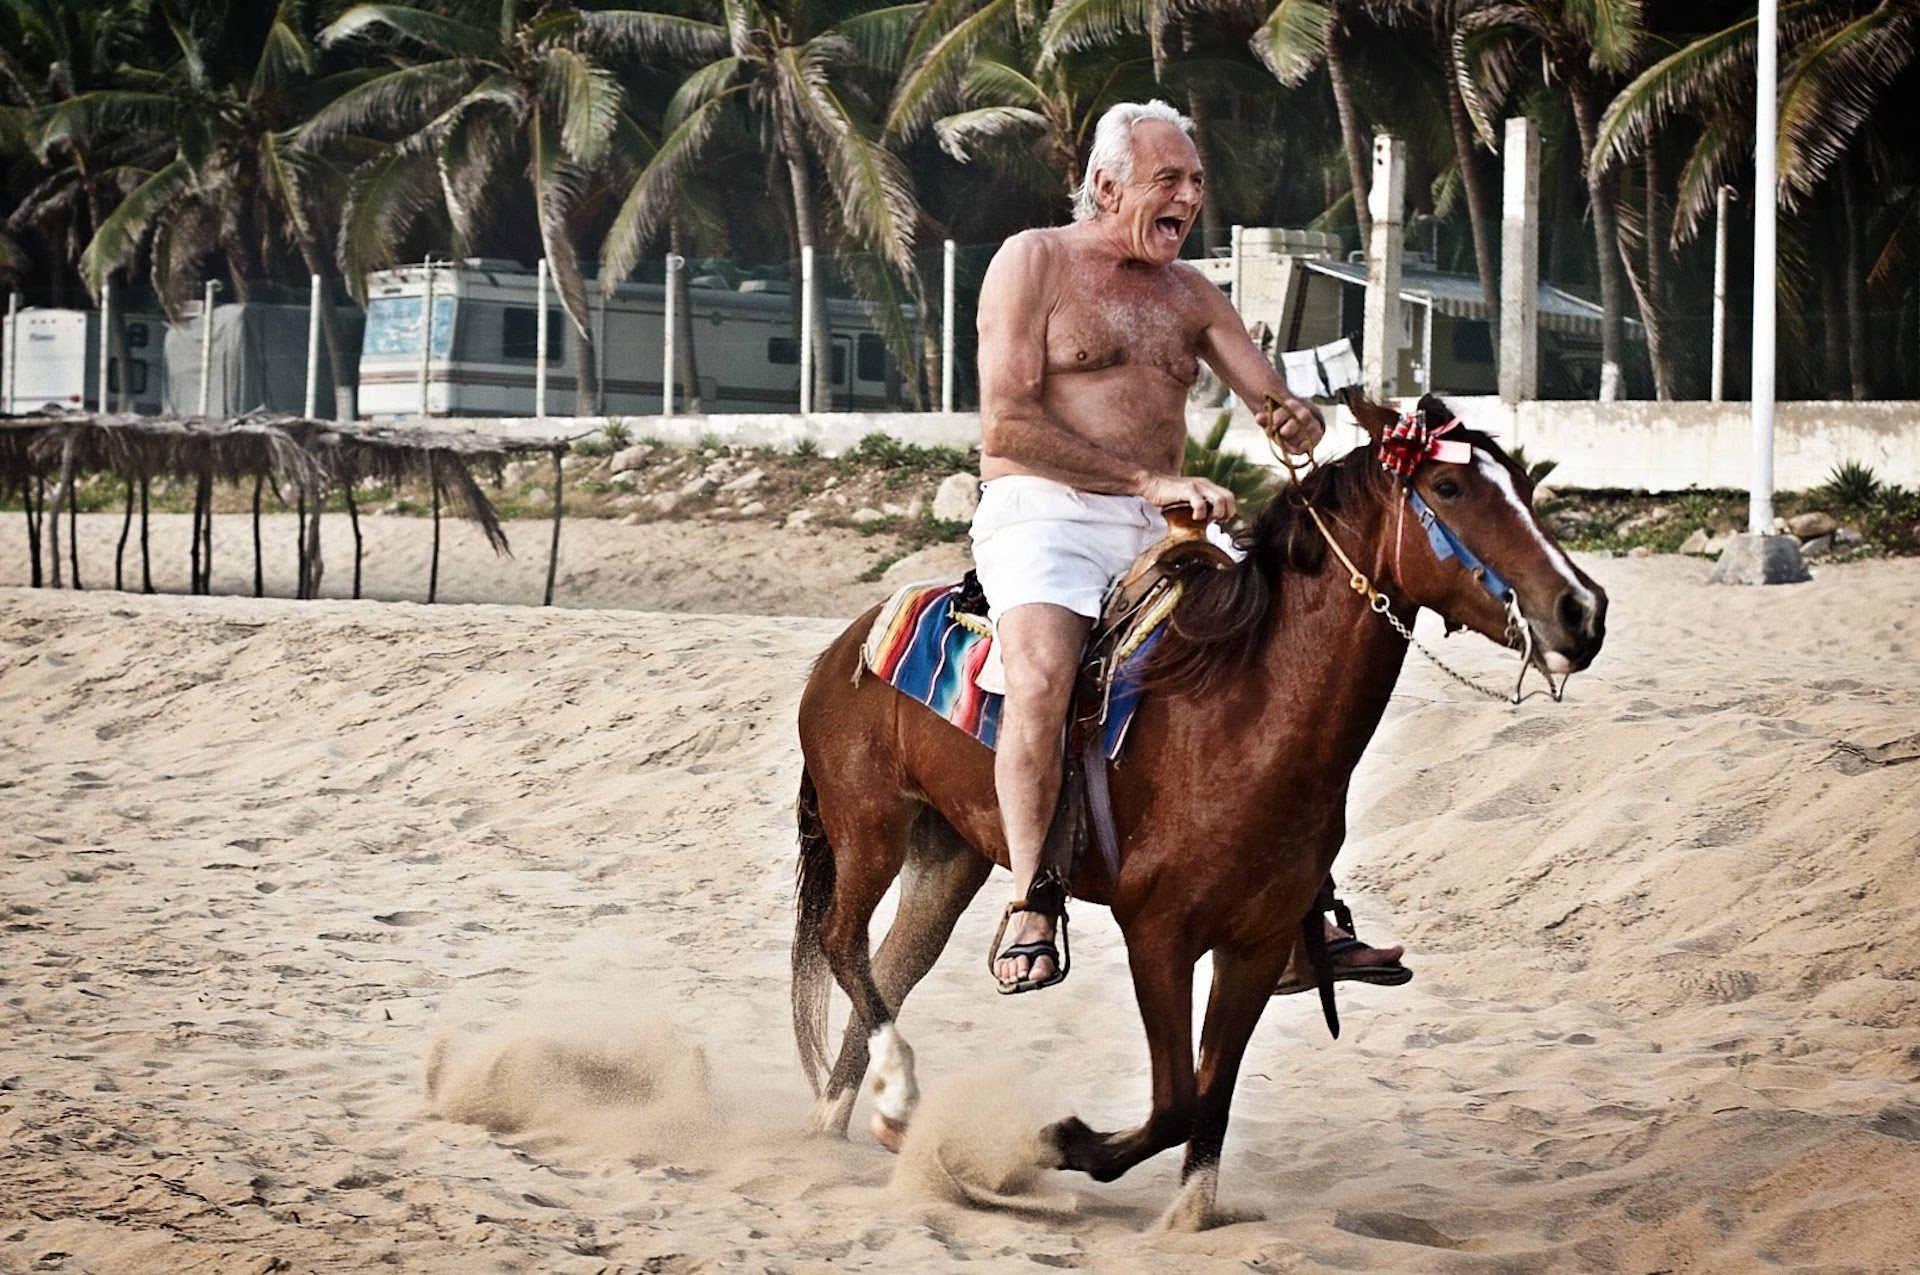 Avram Woidislawsky is pictured on horseback in 2020 on a recent family vacation.